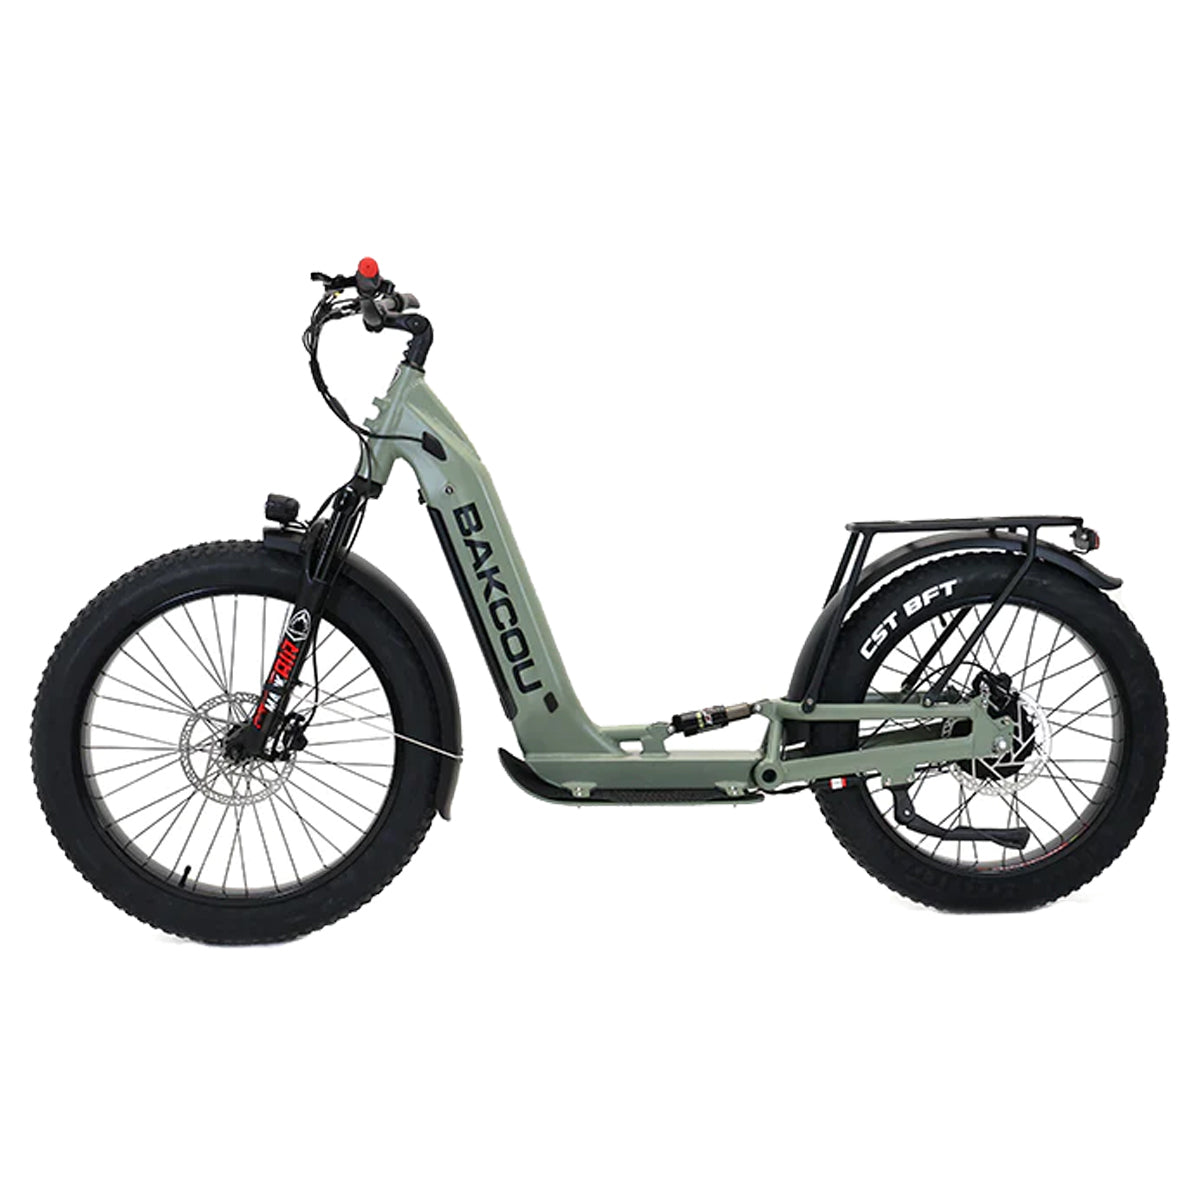 Bakcou Grizzly Electric Scooter in Sage Green by GOHUNT | Bakcou - GOHUNT Shop